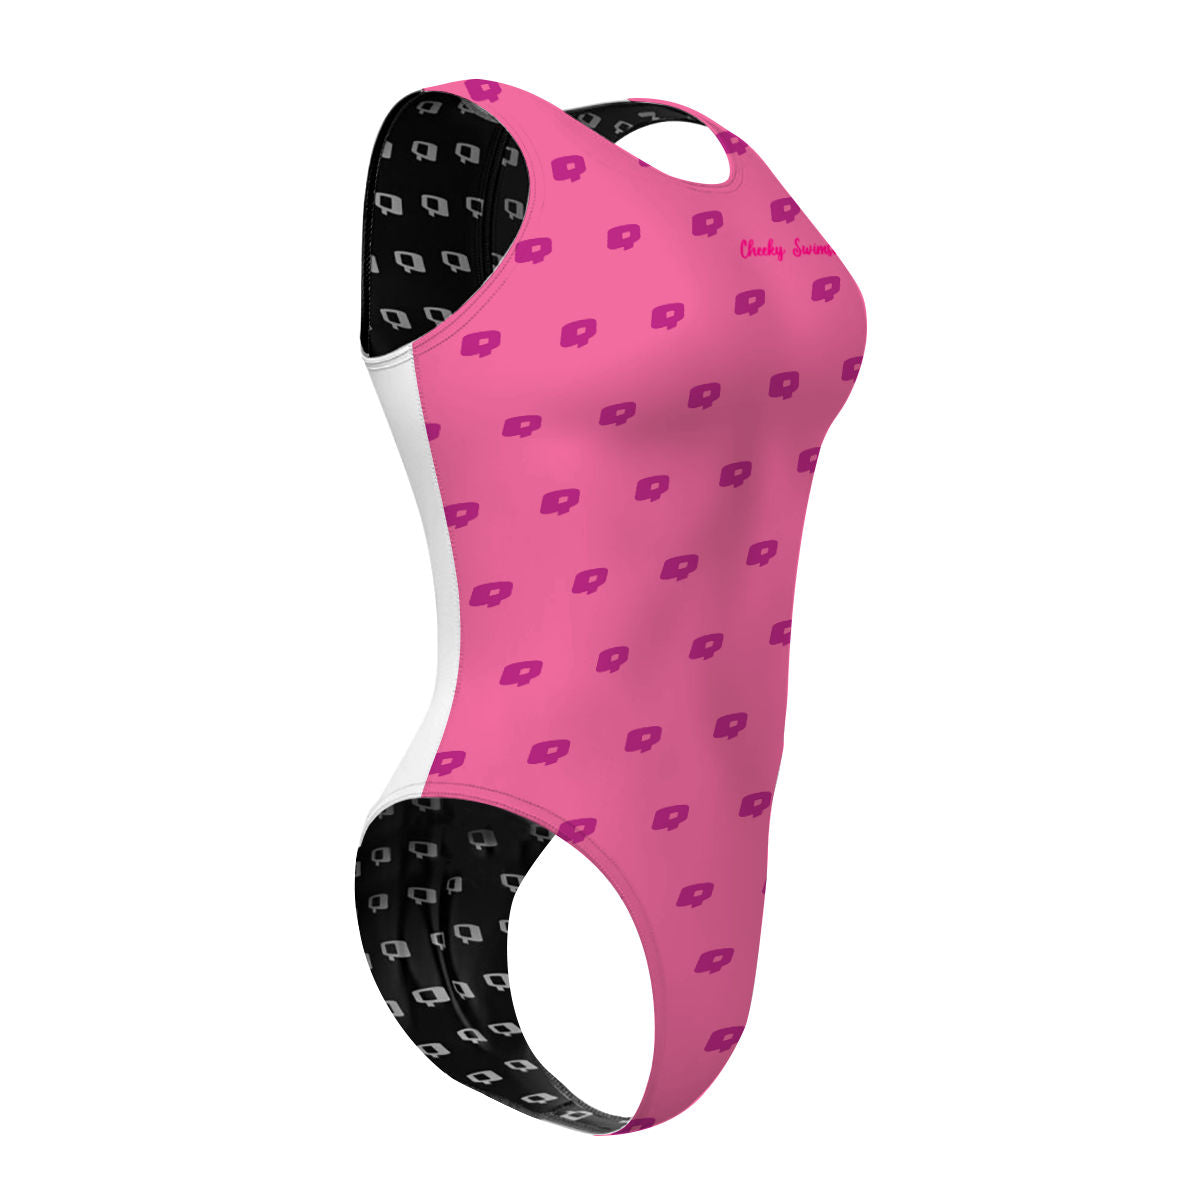 Pink Q Water Polo - Women's Waterpolo Swimsuit Cheeky Cut